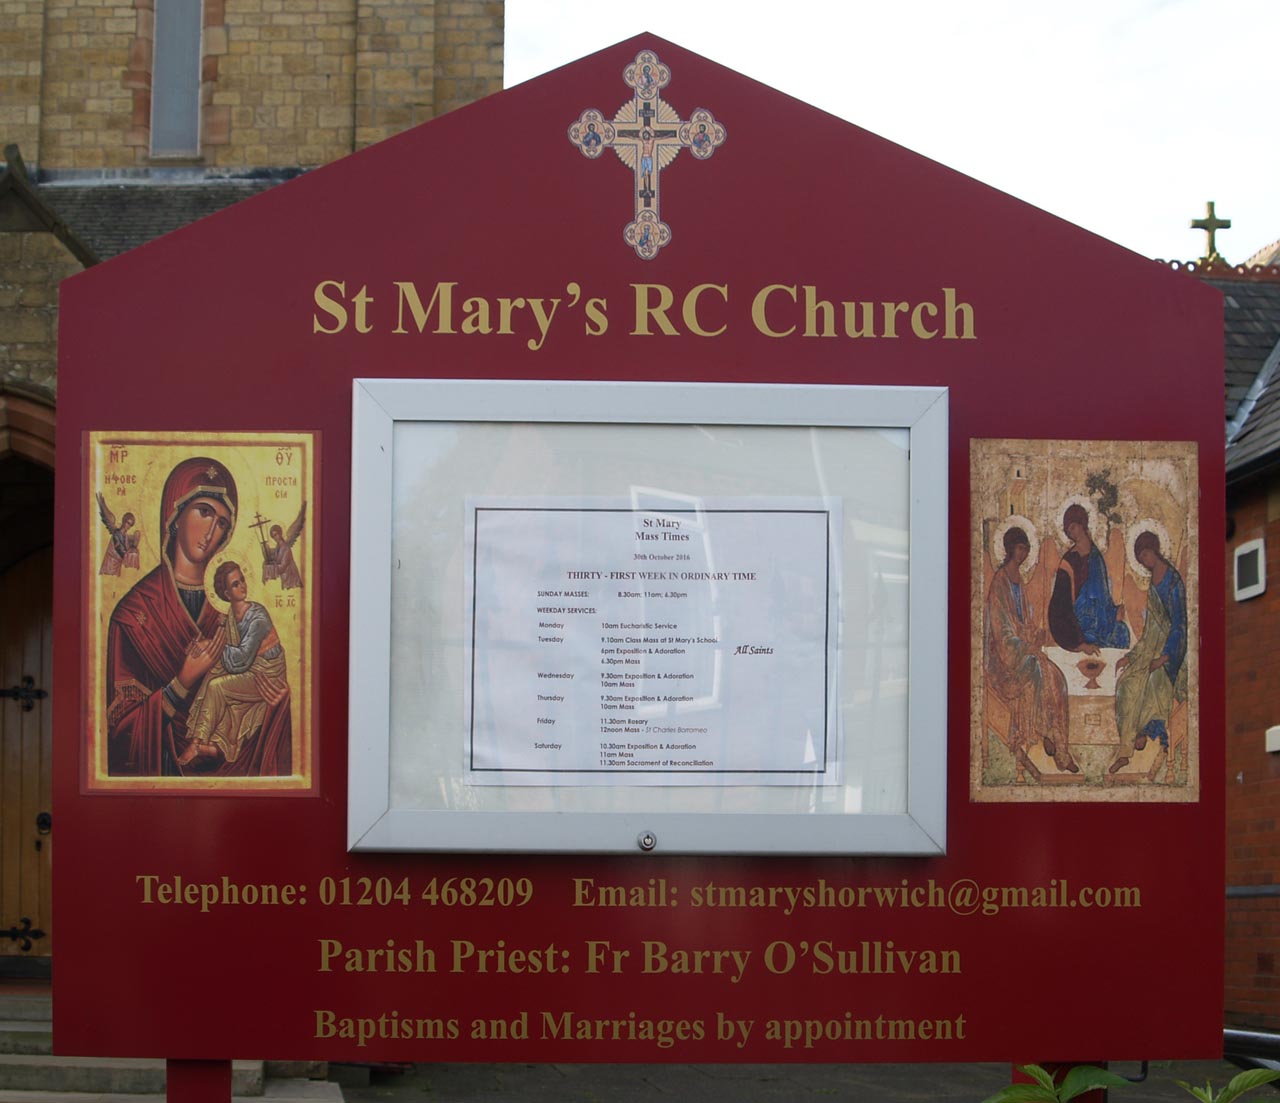 The Church Board for St Mary, Horwich